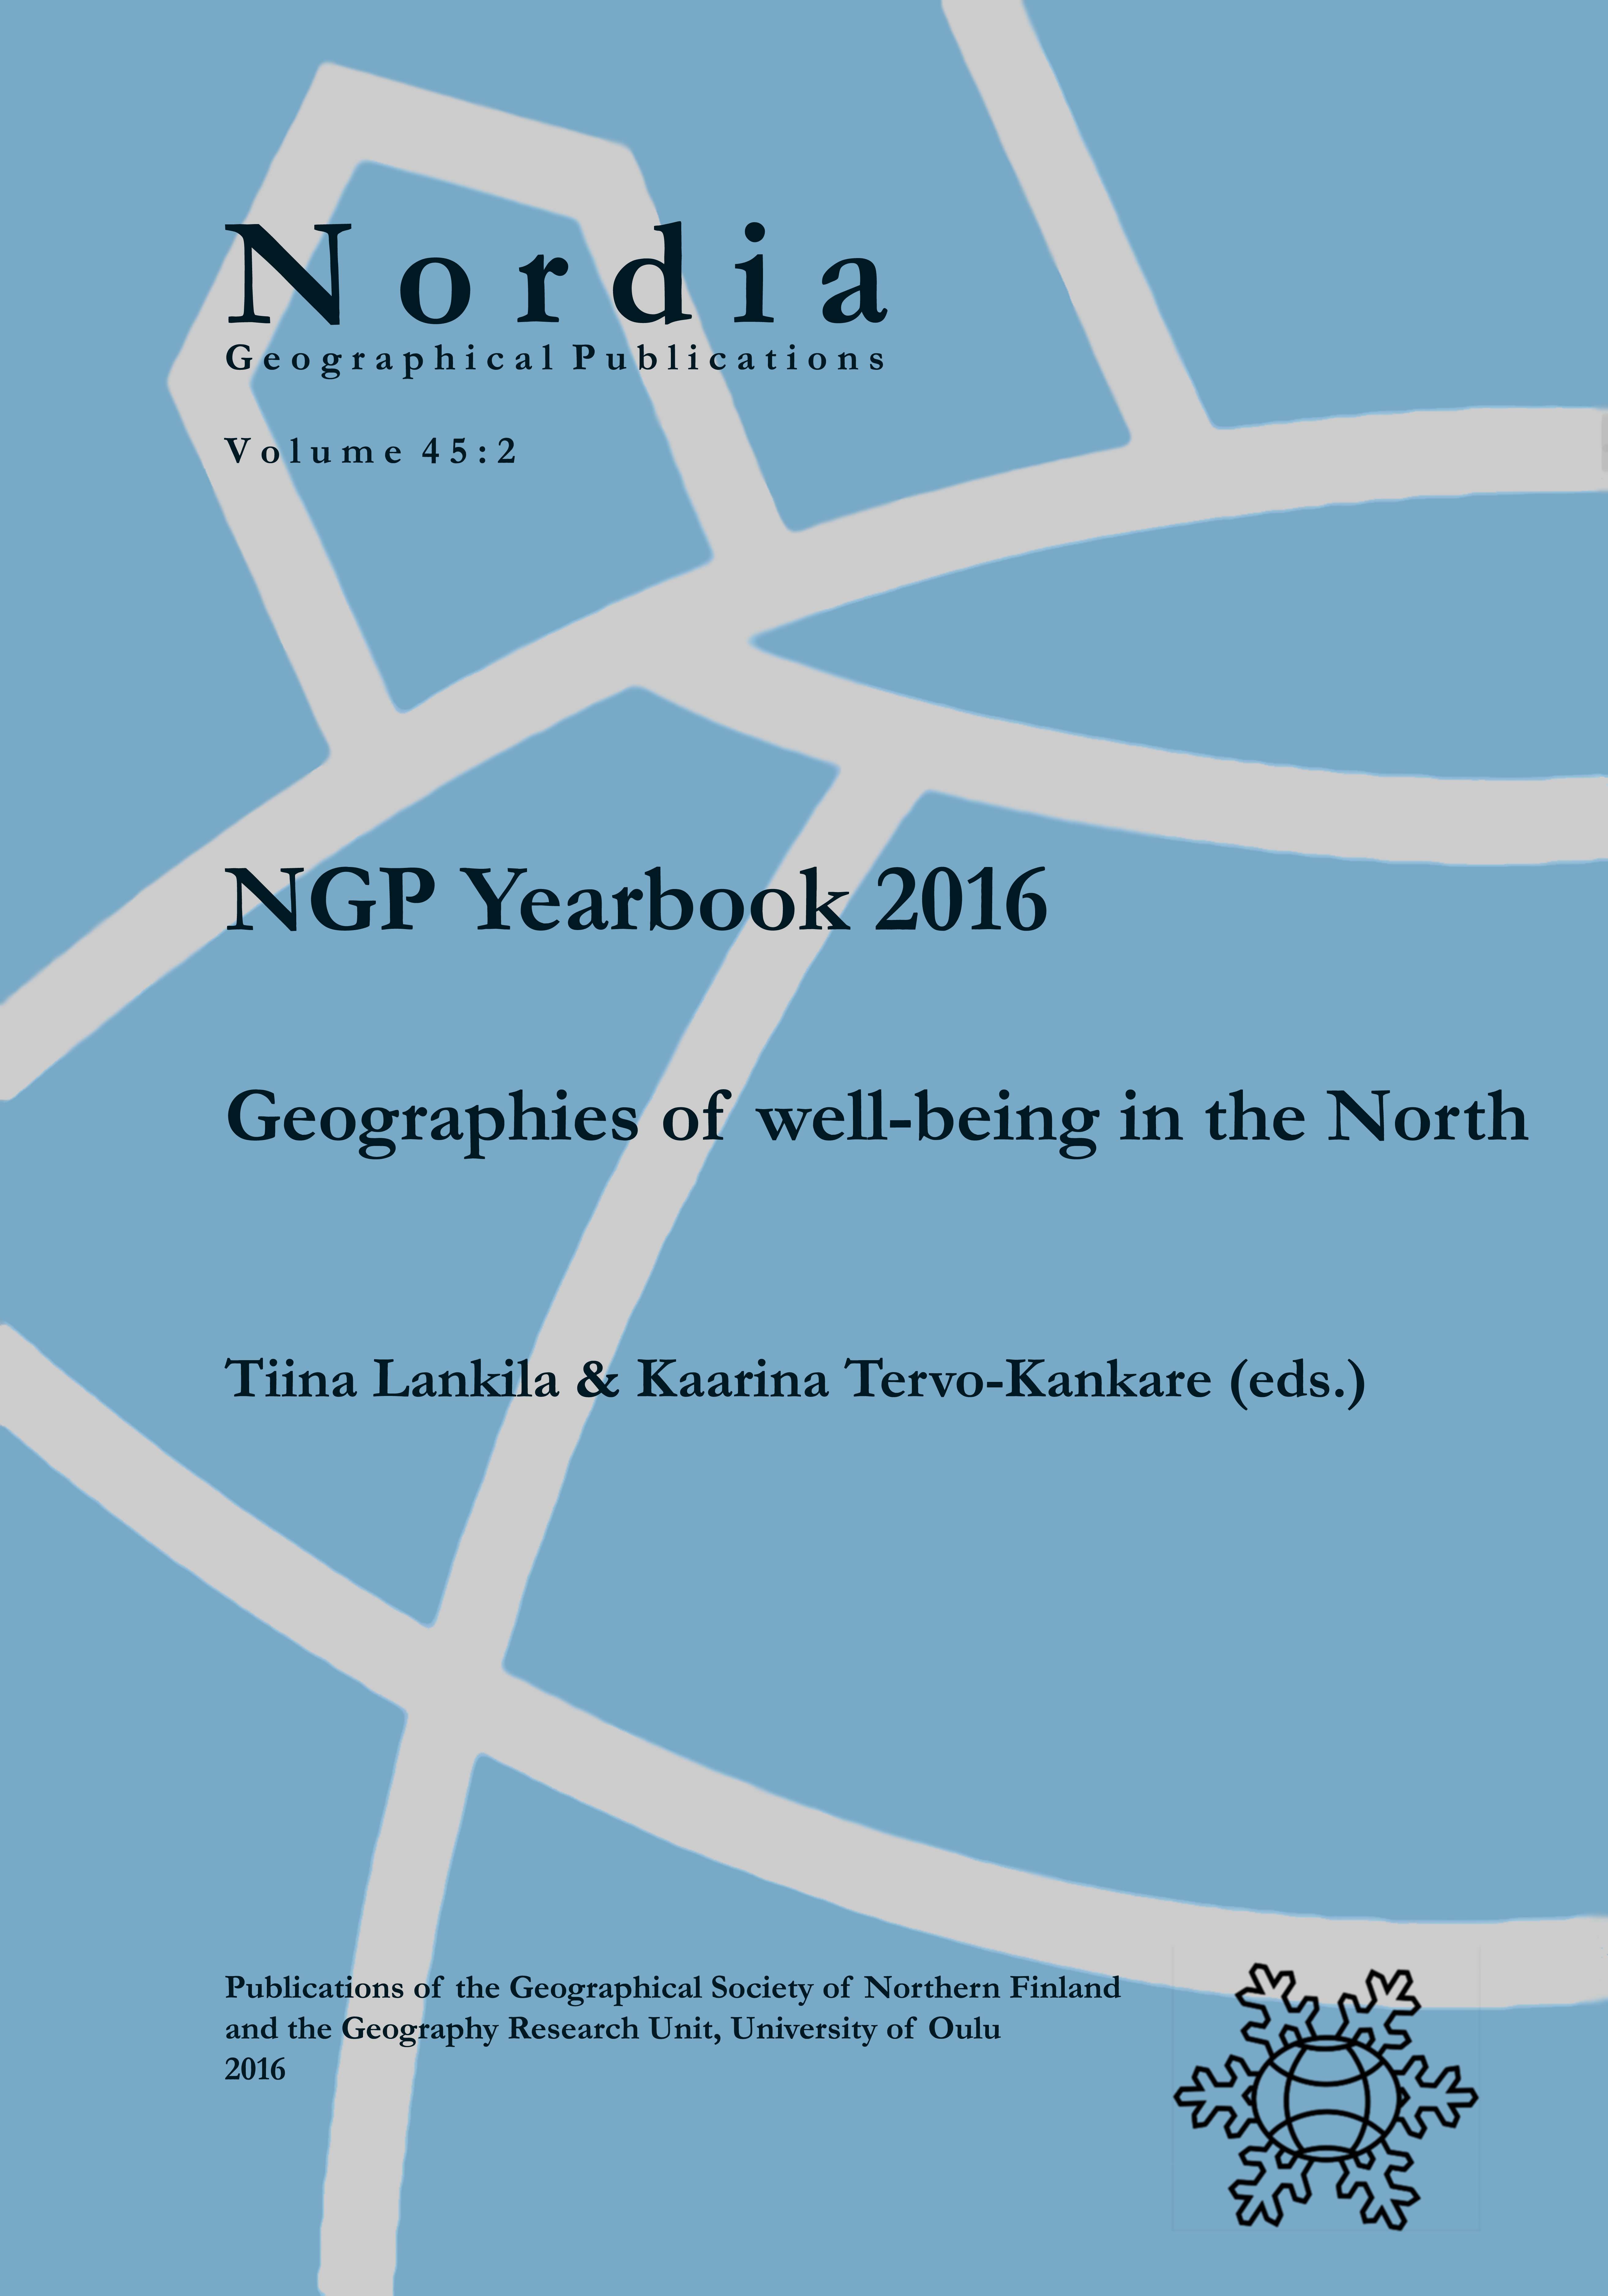 					View Vol. 45 No. 2: NGP Yearbook 2016: Geographies of well-being in the North
				